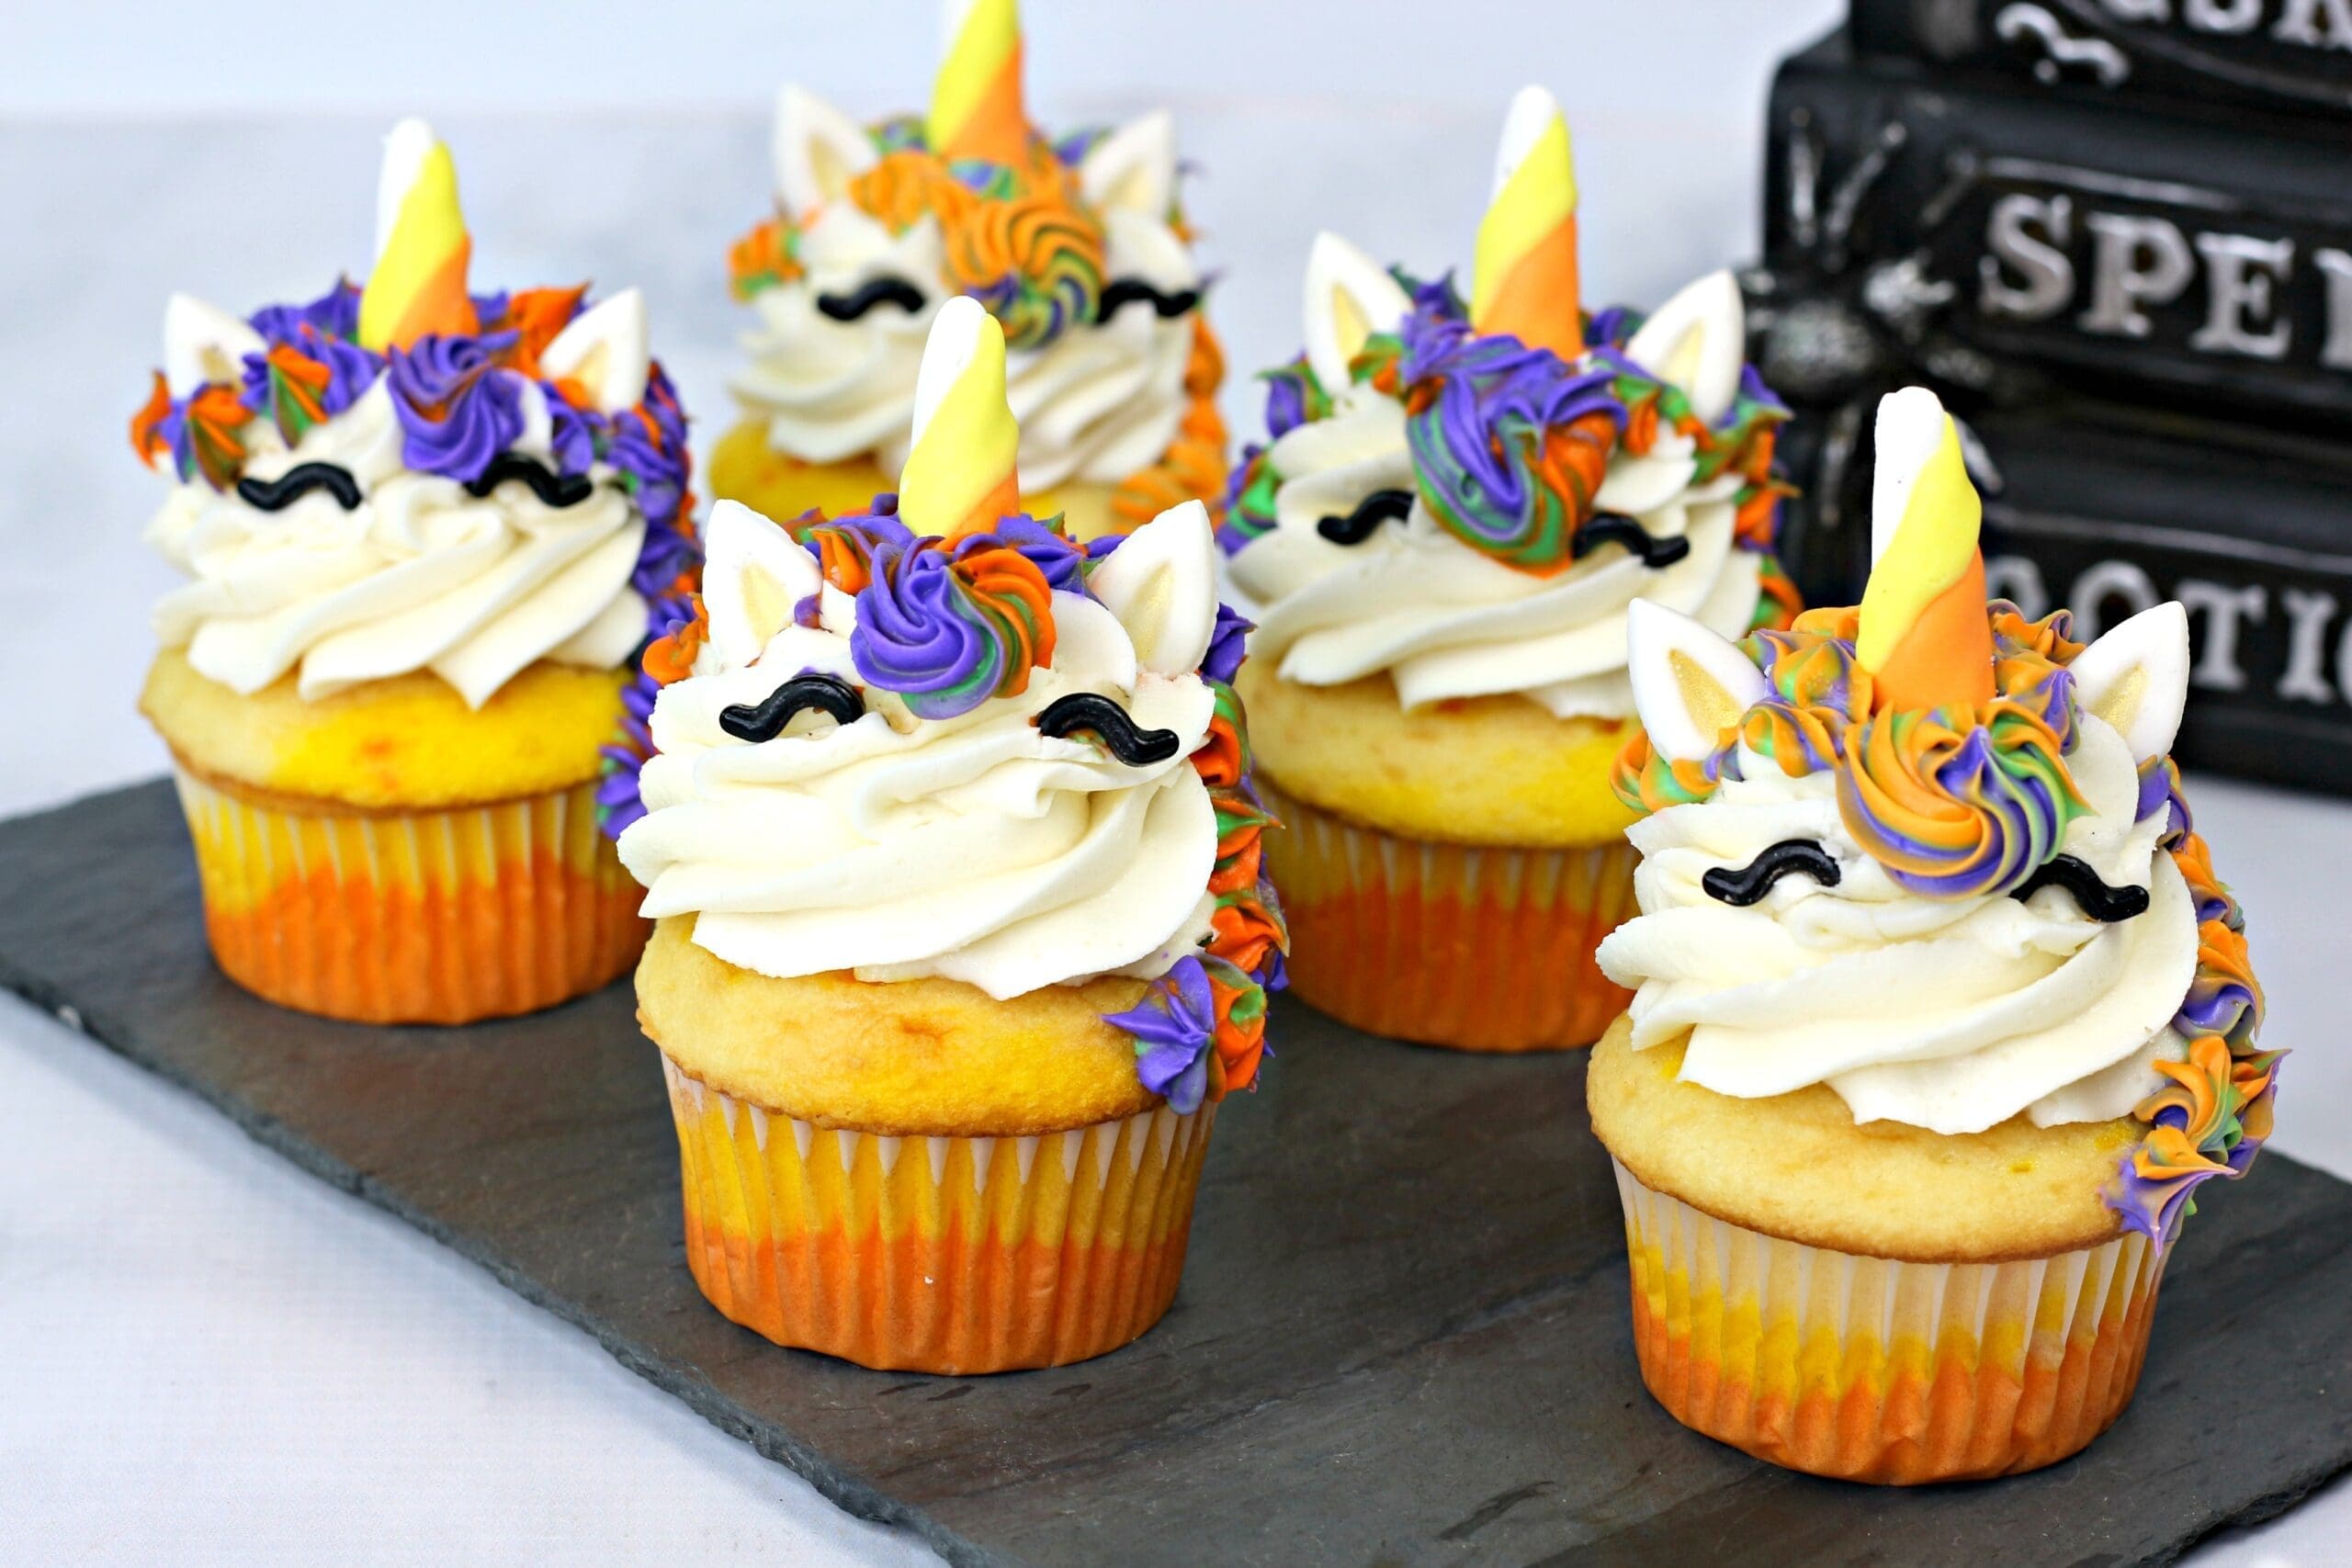 Enchanting Delights: A Unicorn Cupcake That Sparkles with Magic